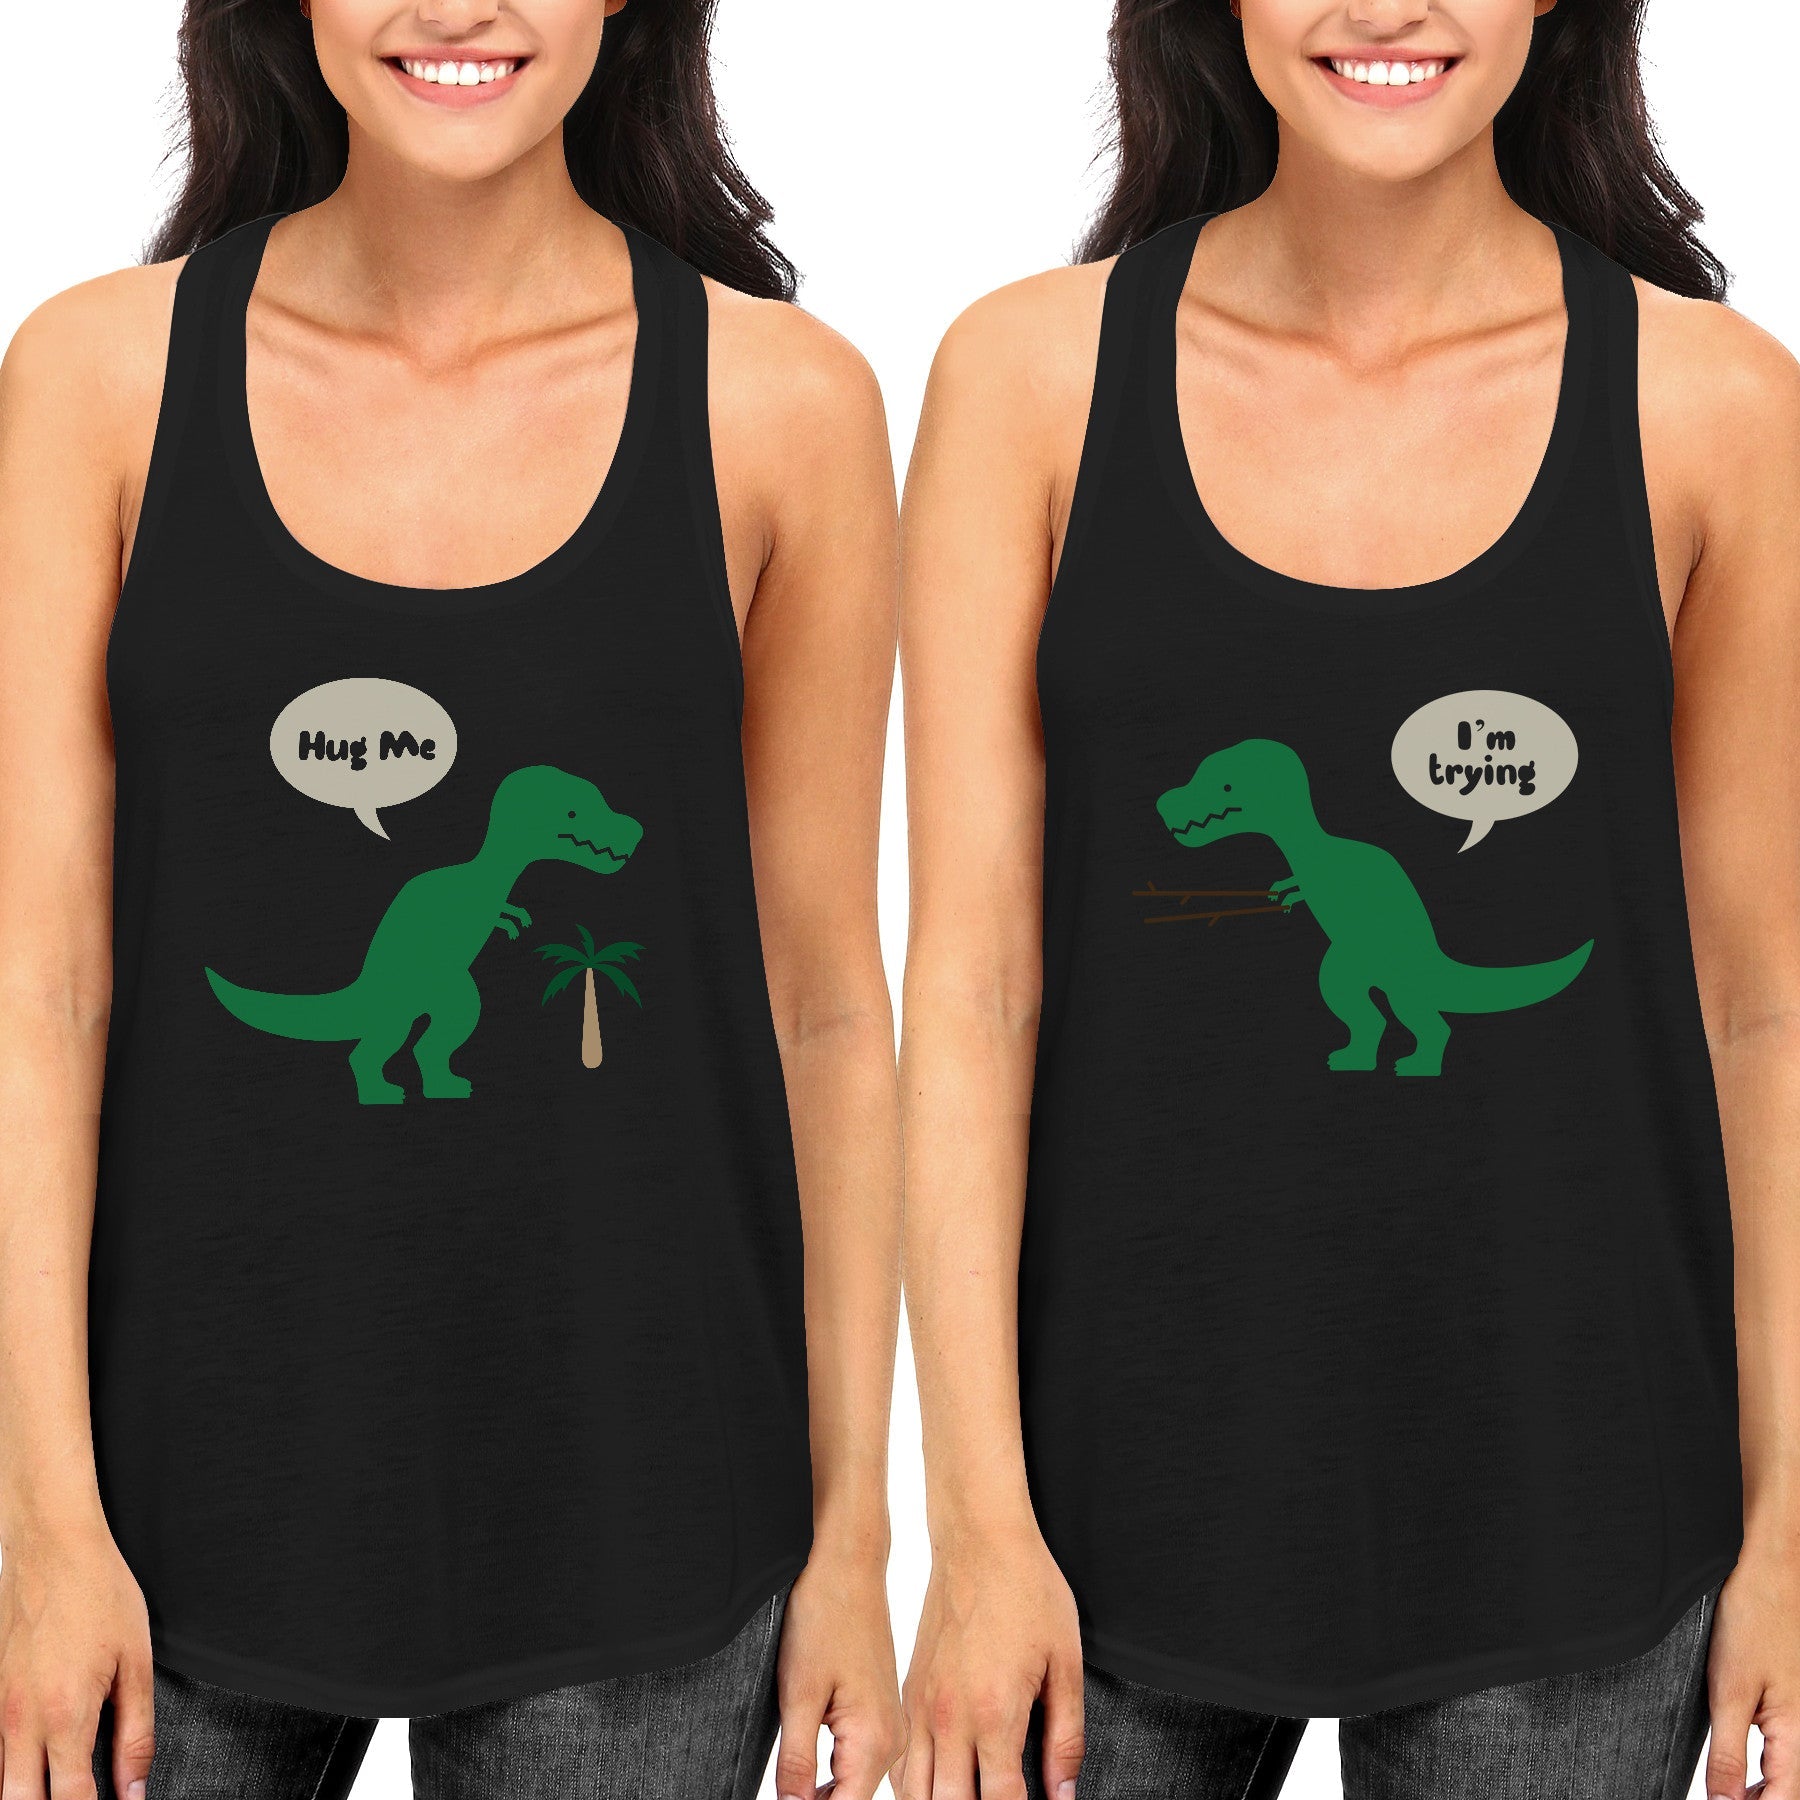 Cute Bff T-Rex Hug Me And I'M Trying Best Friend Matching Tanktops Shirts - 365 In Love